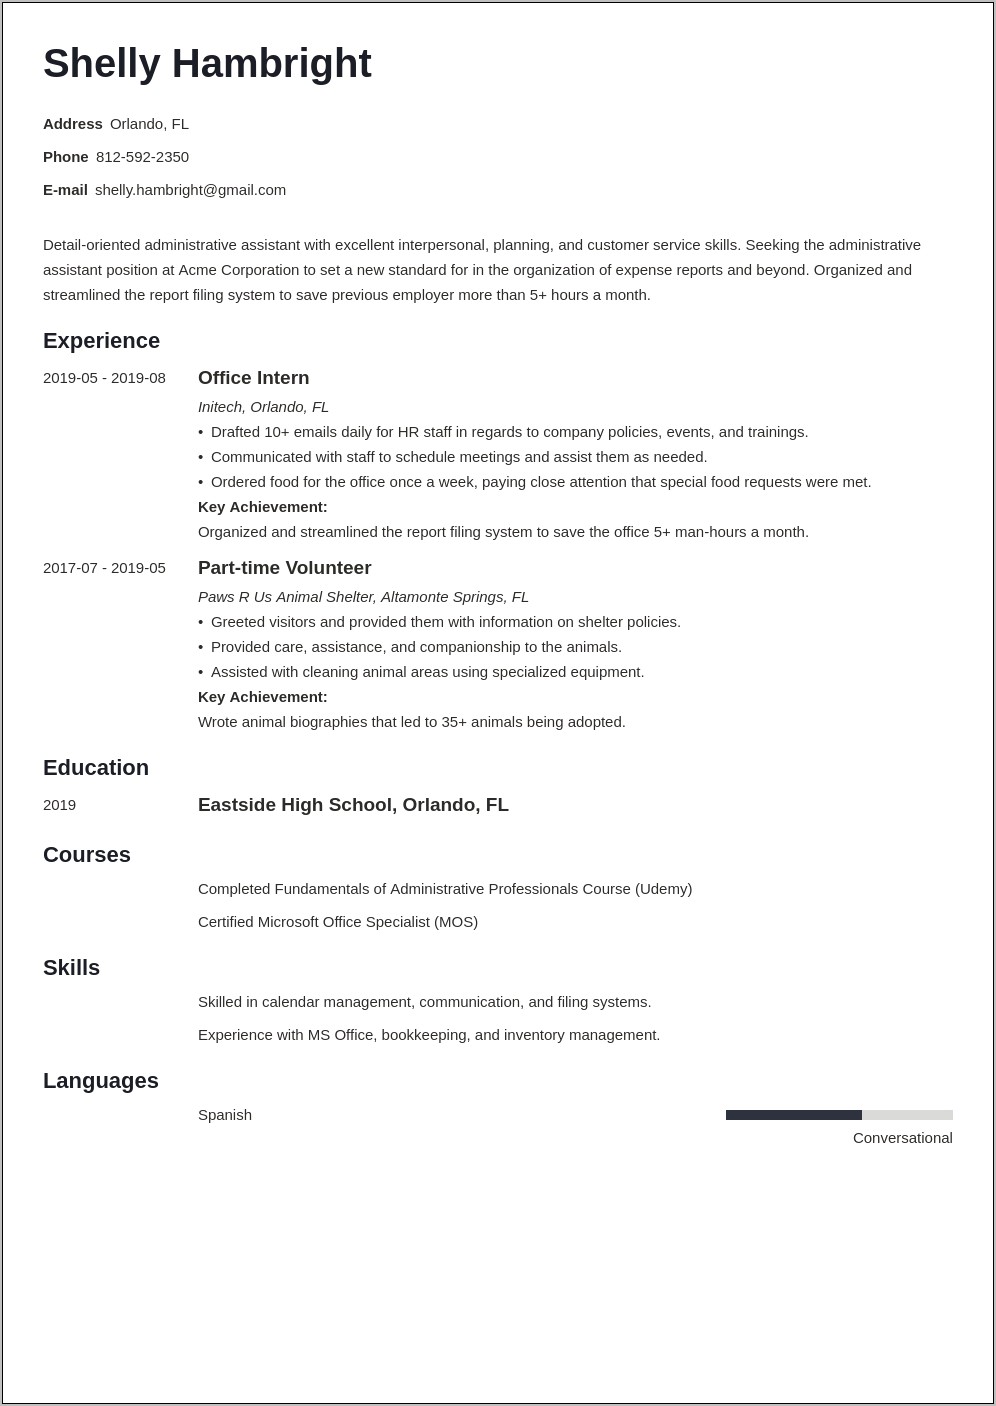 Data Entry Specialist Resume Sample